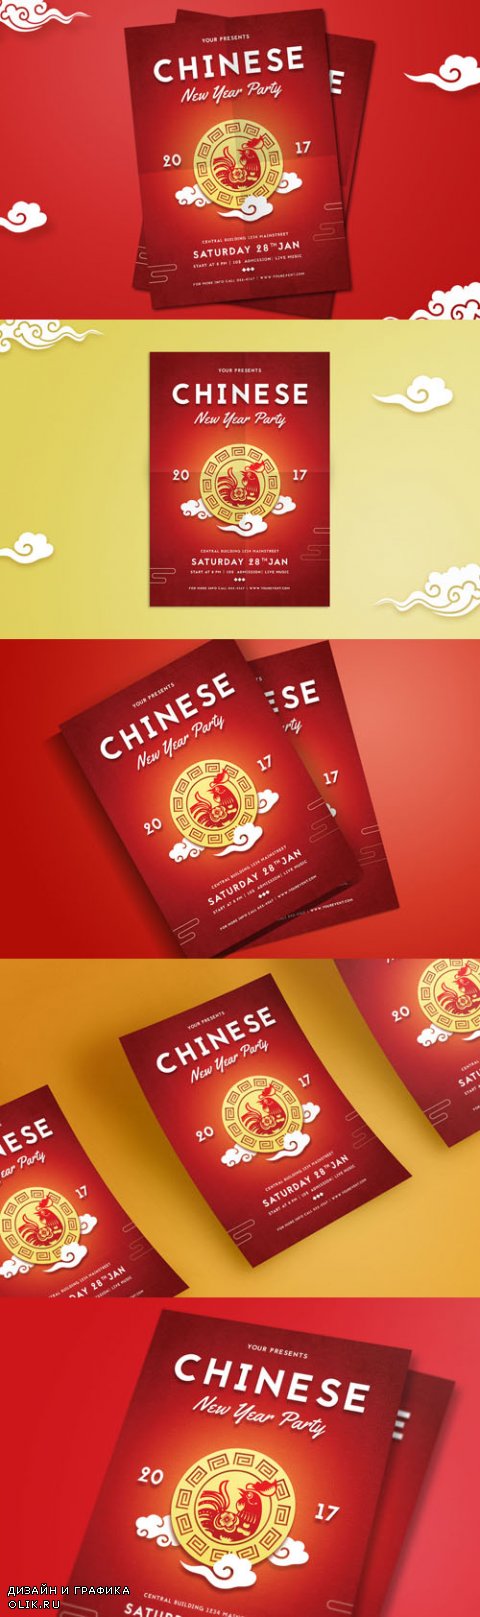 Chinese New Year Flyer 02